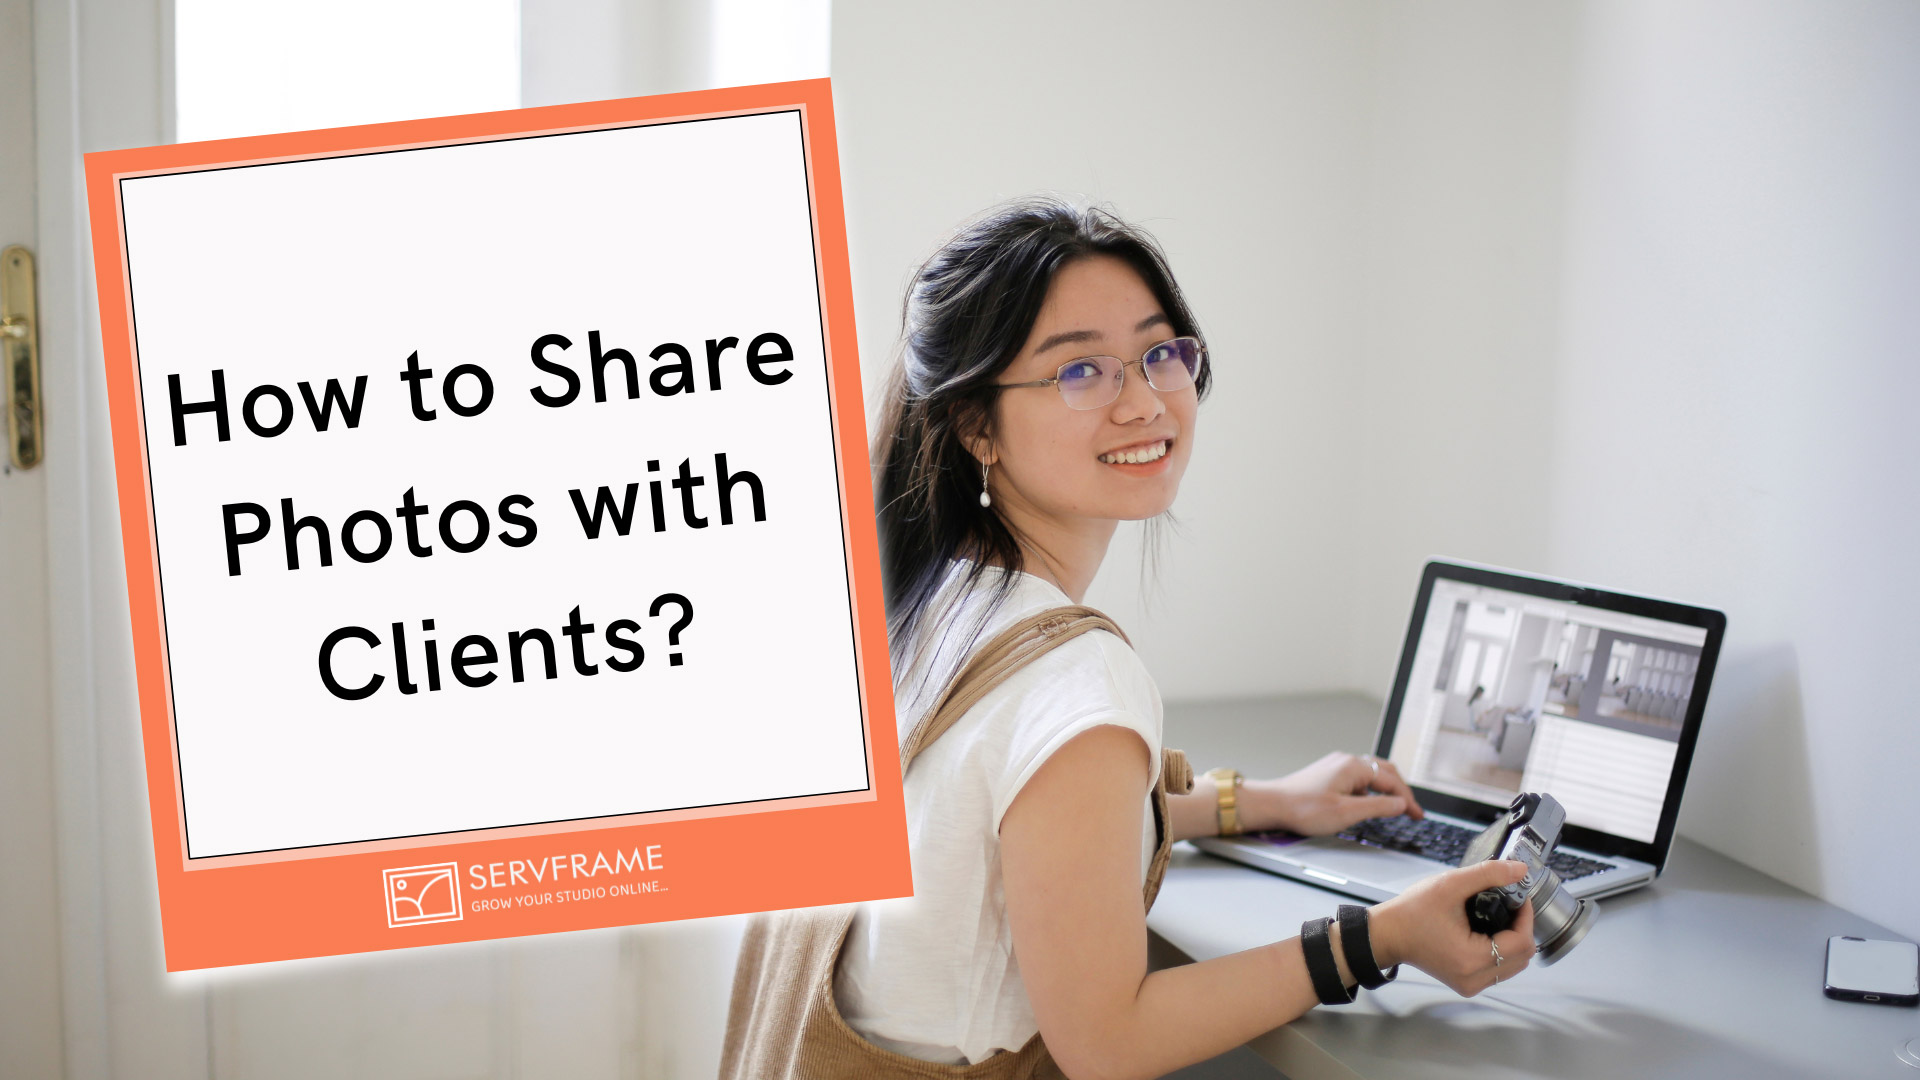 How to Share Photos with Clients?